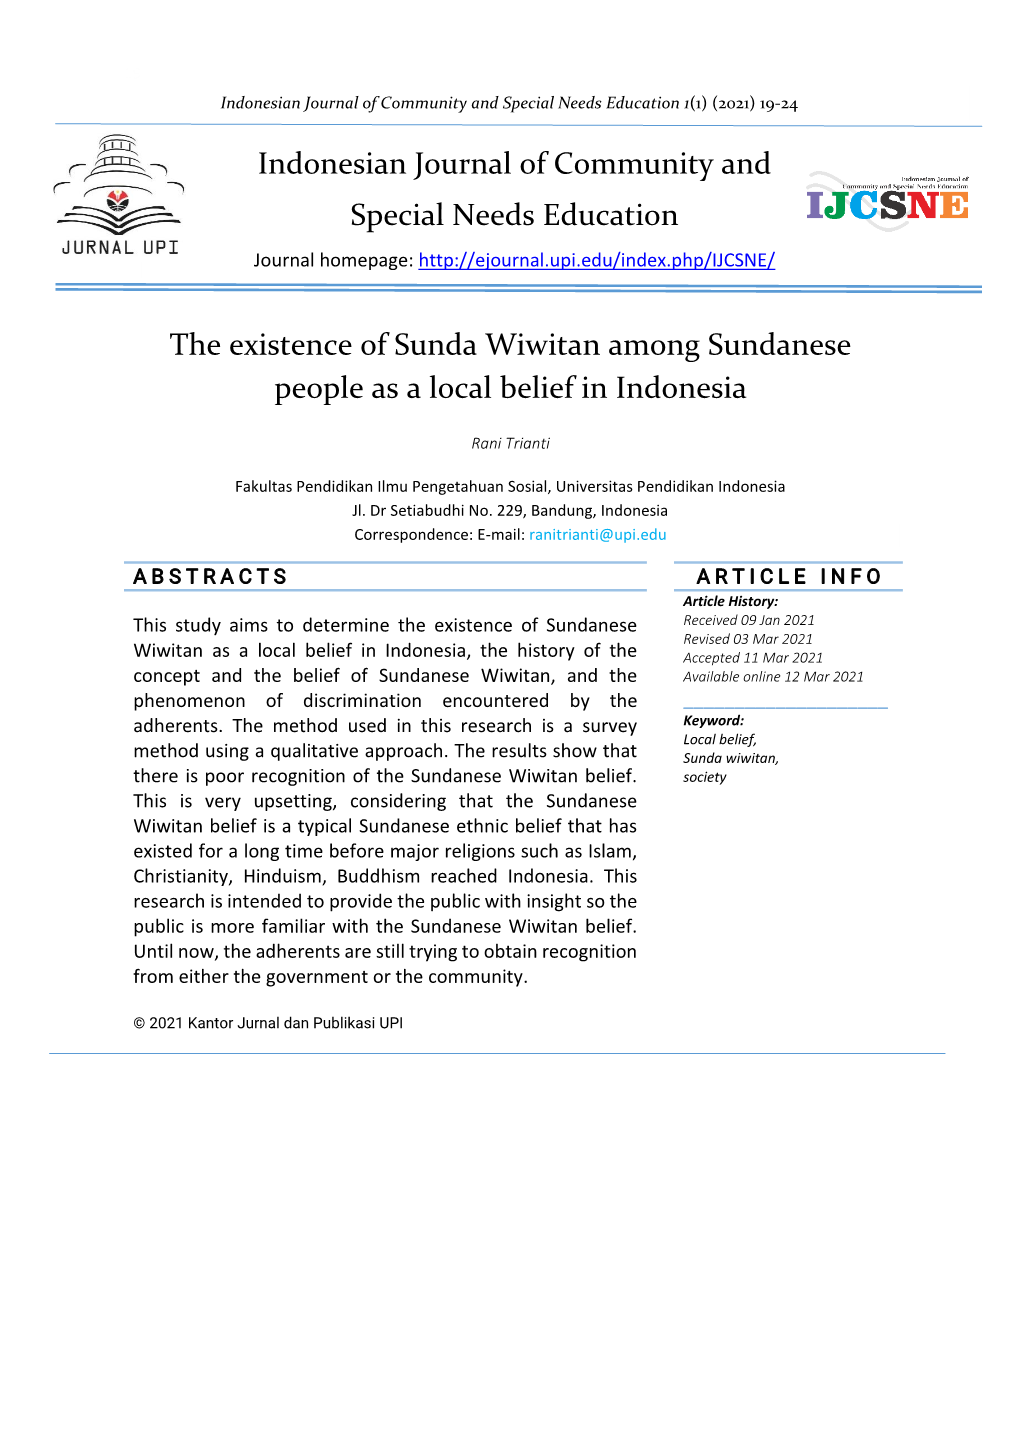 The Existence of Sunda Wiwitan Among Sundanese People As a Local Belief in Indonesia